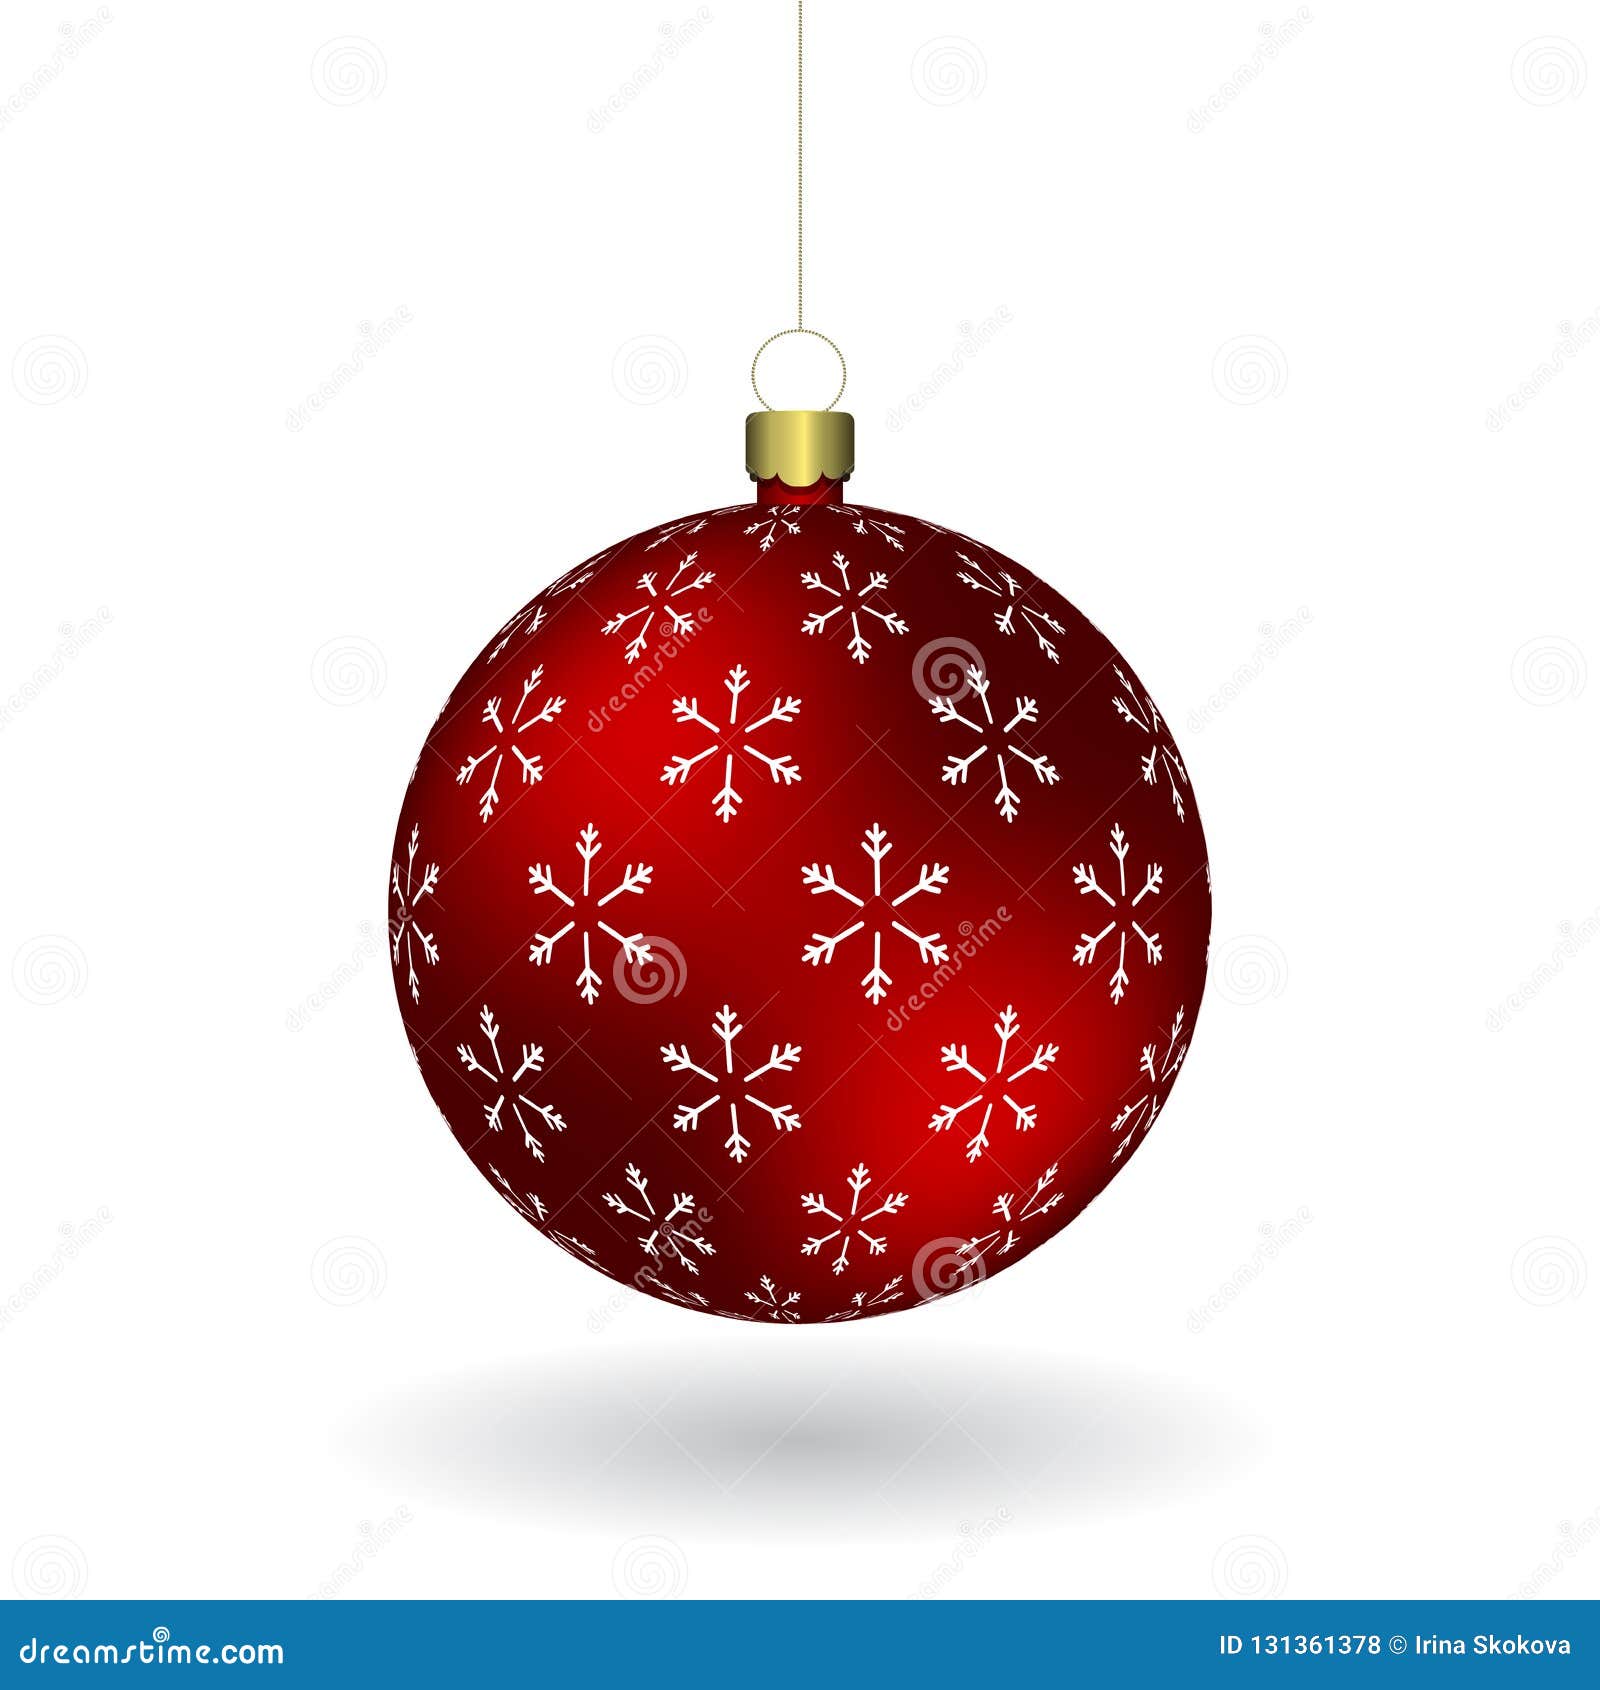 red christmass ball with snowflakes print hanging on a golden chain